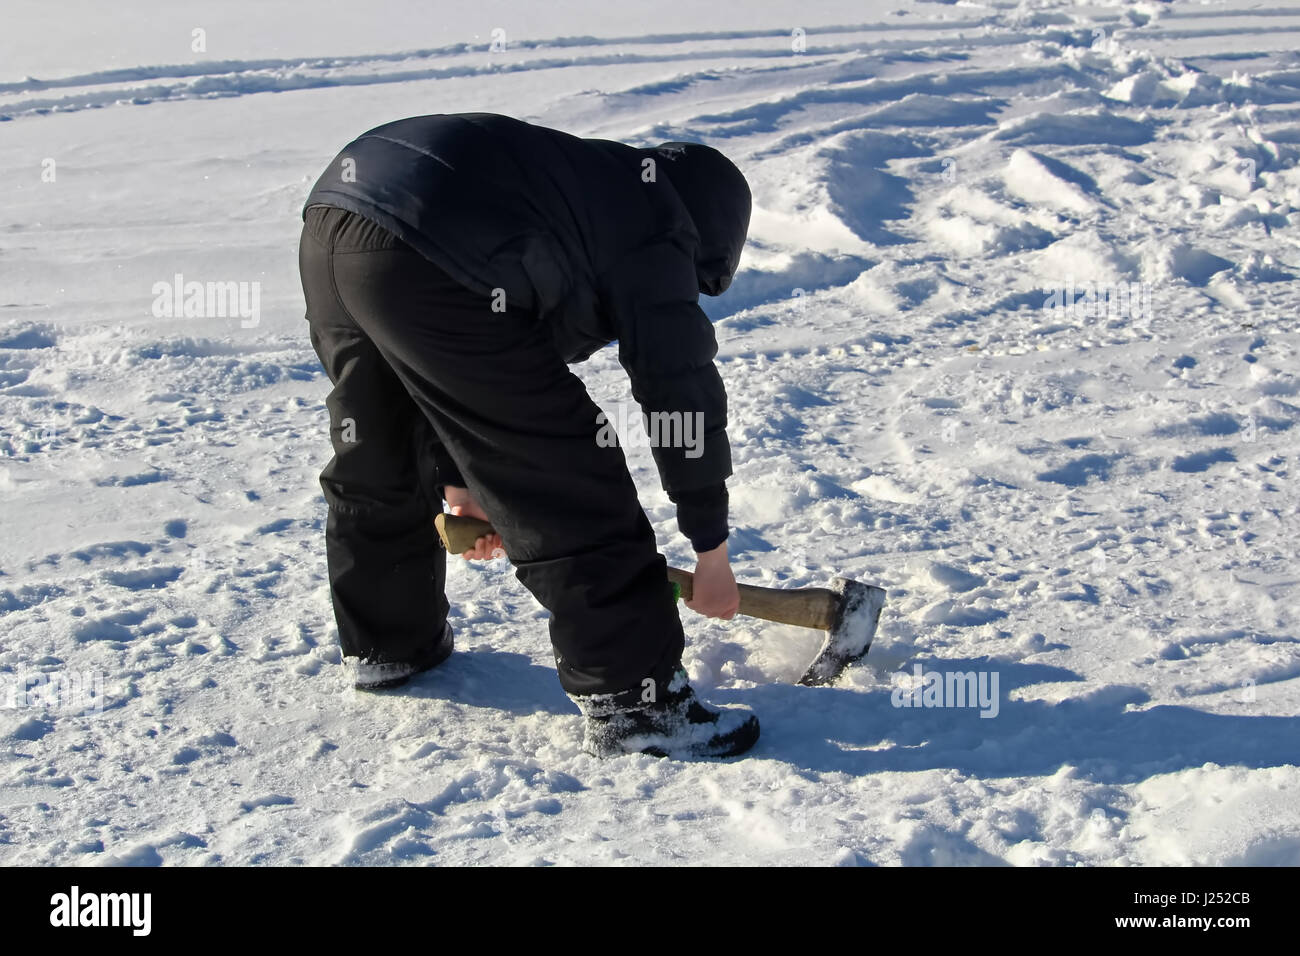 Bobber in a Hole in the Ice Stock Photo - Image of cracksinice,  winterfishing: 58142772